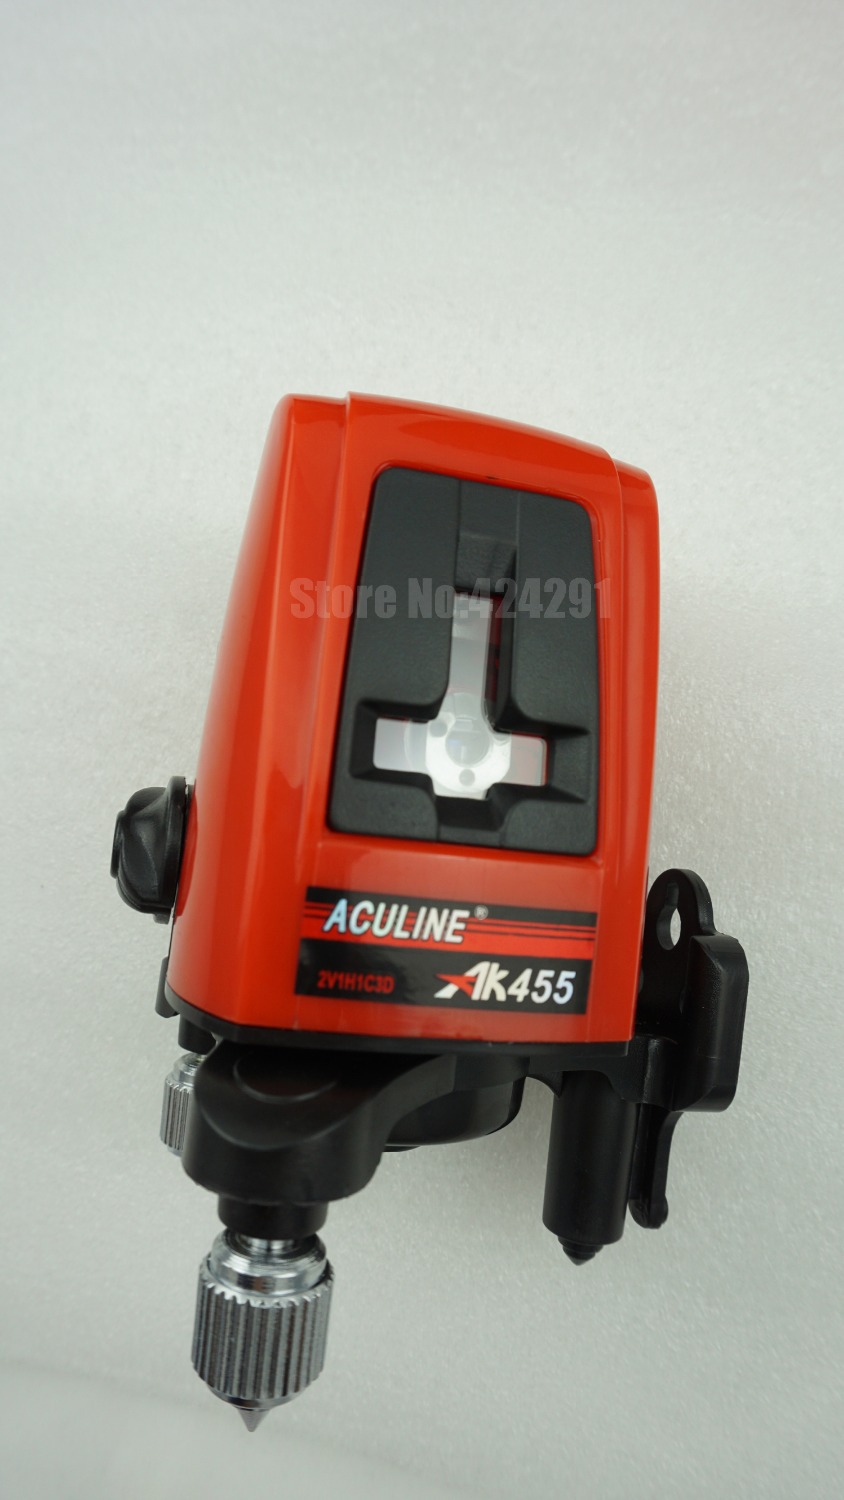 Free Shipping 3 Line 3 Point AK 455 360degree Self leveling Cross Laser Level Red HOT